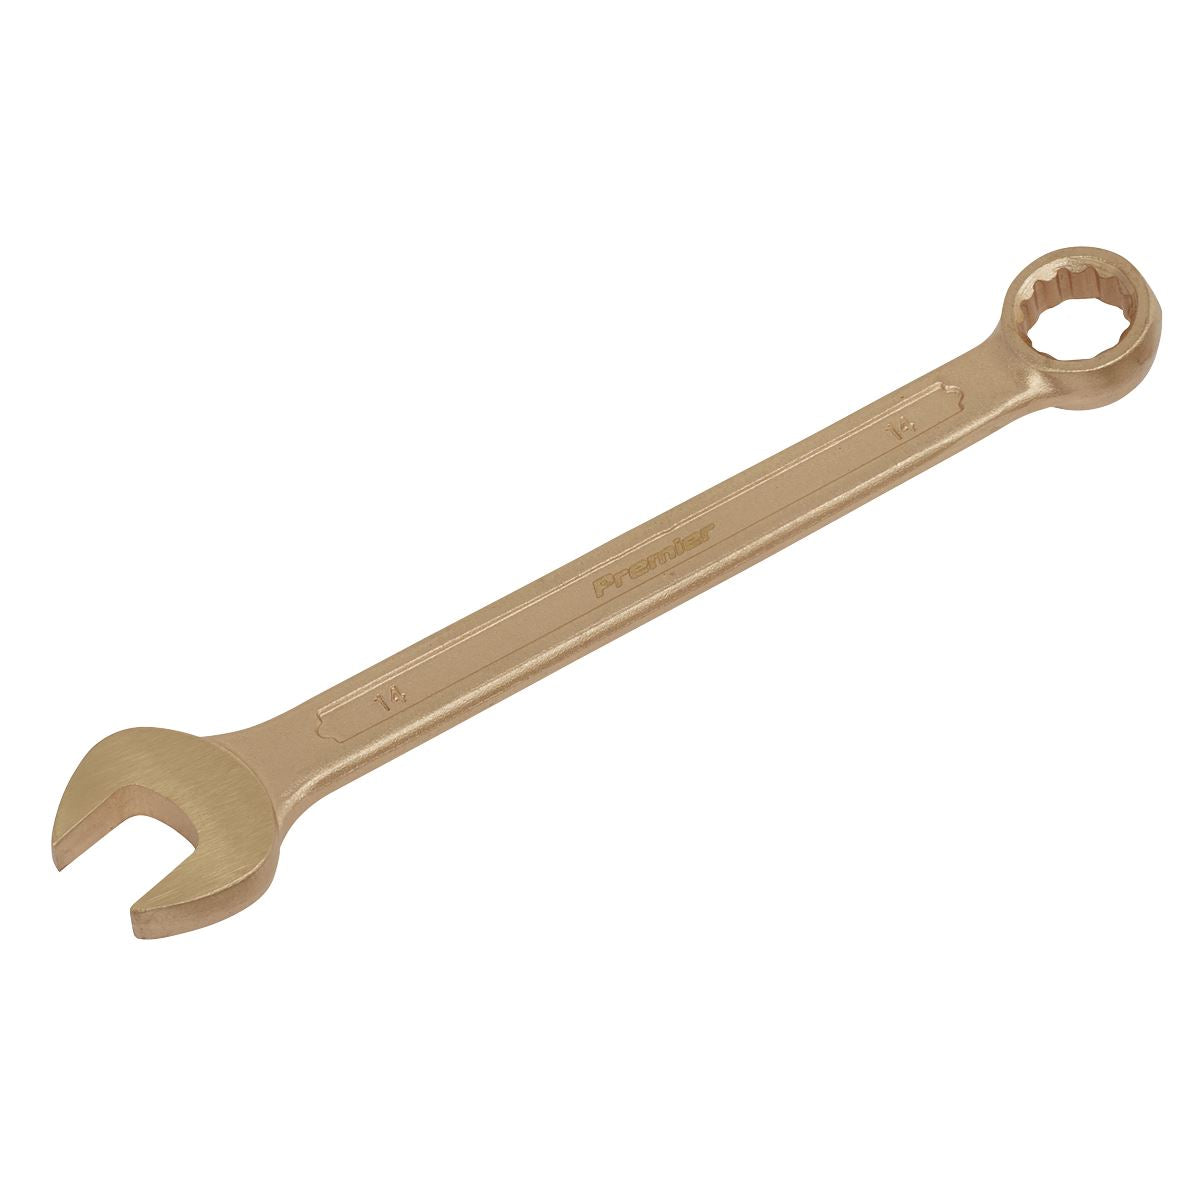 Sealey Premier Combination Spanner 14mm - Non-Sparking